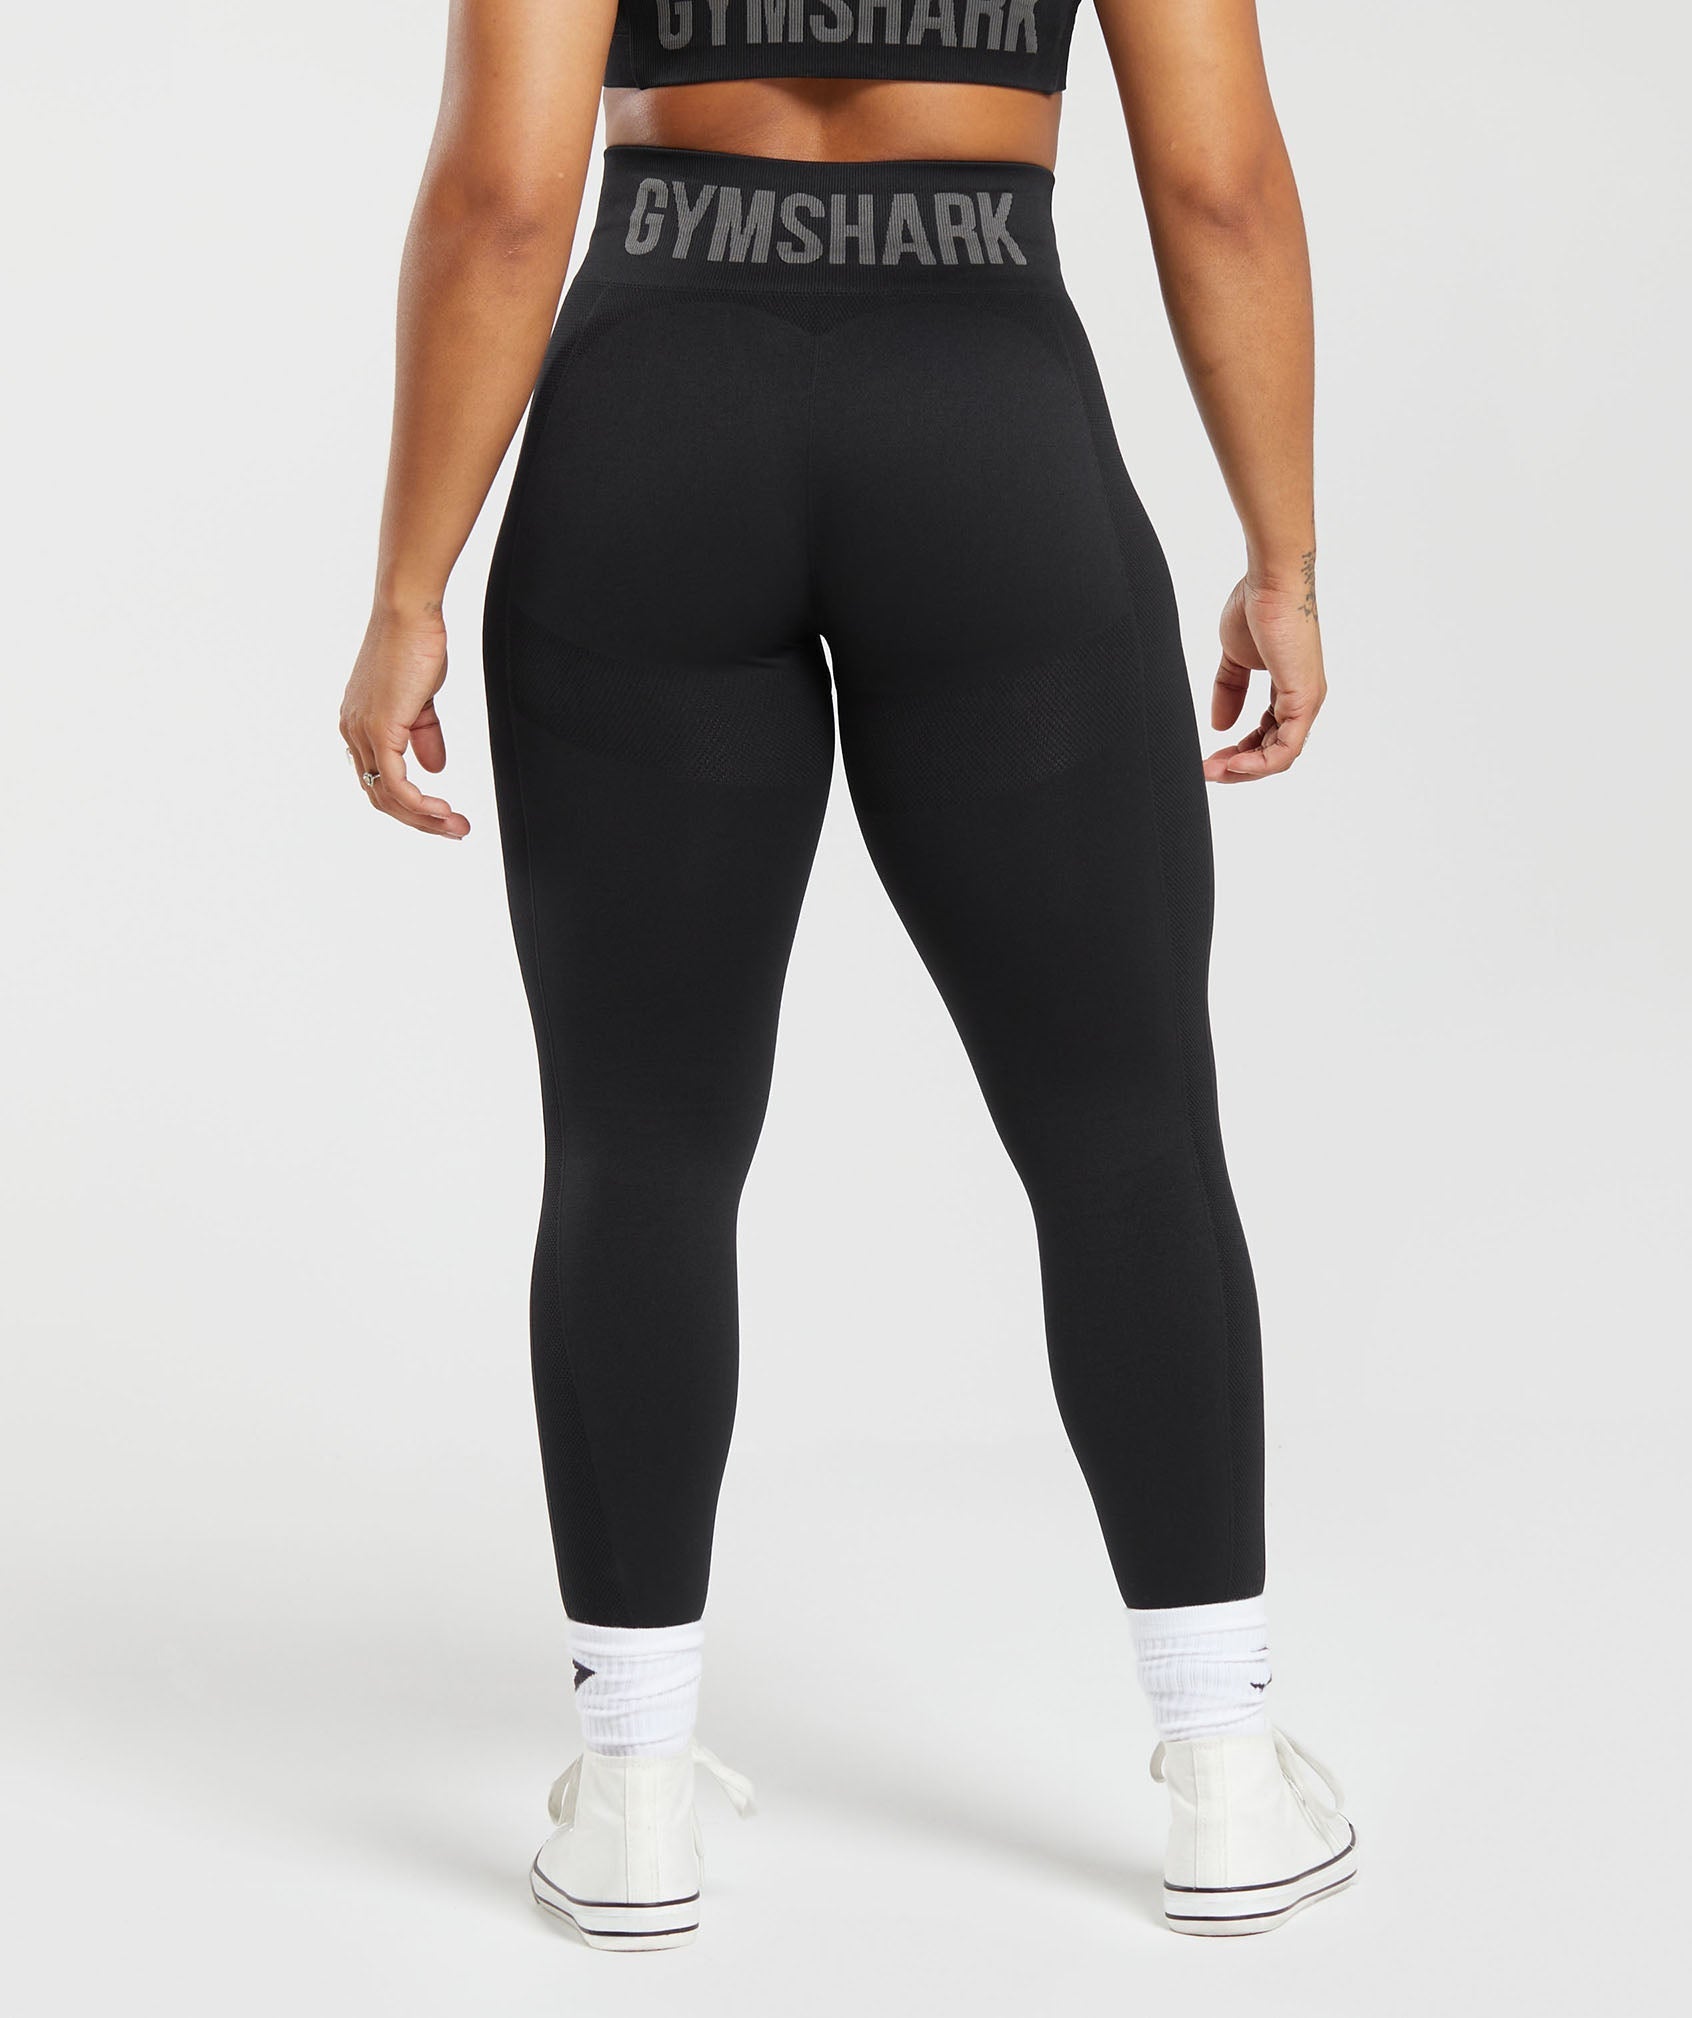 Lux High-Waisted Leggings in BLACK